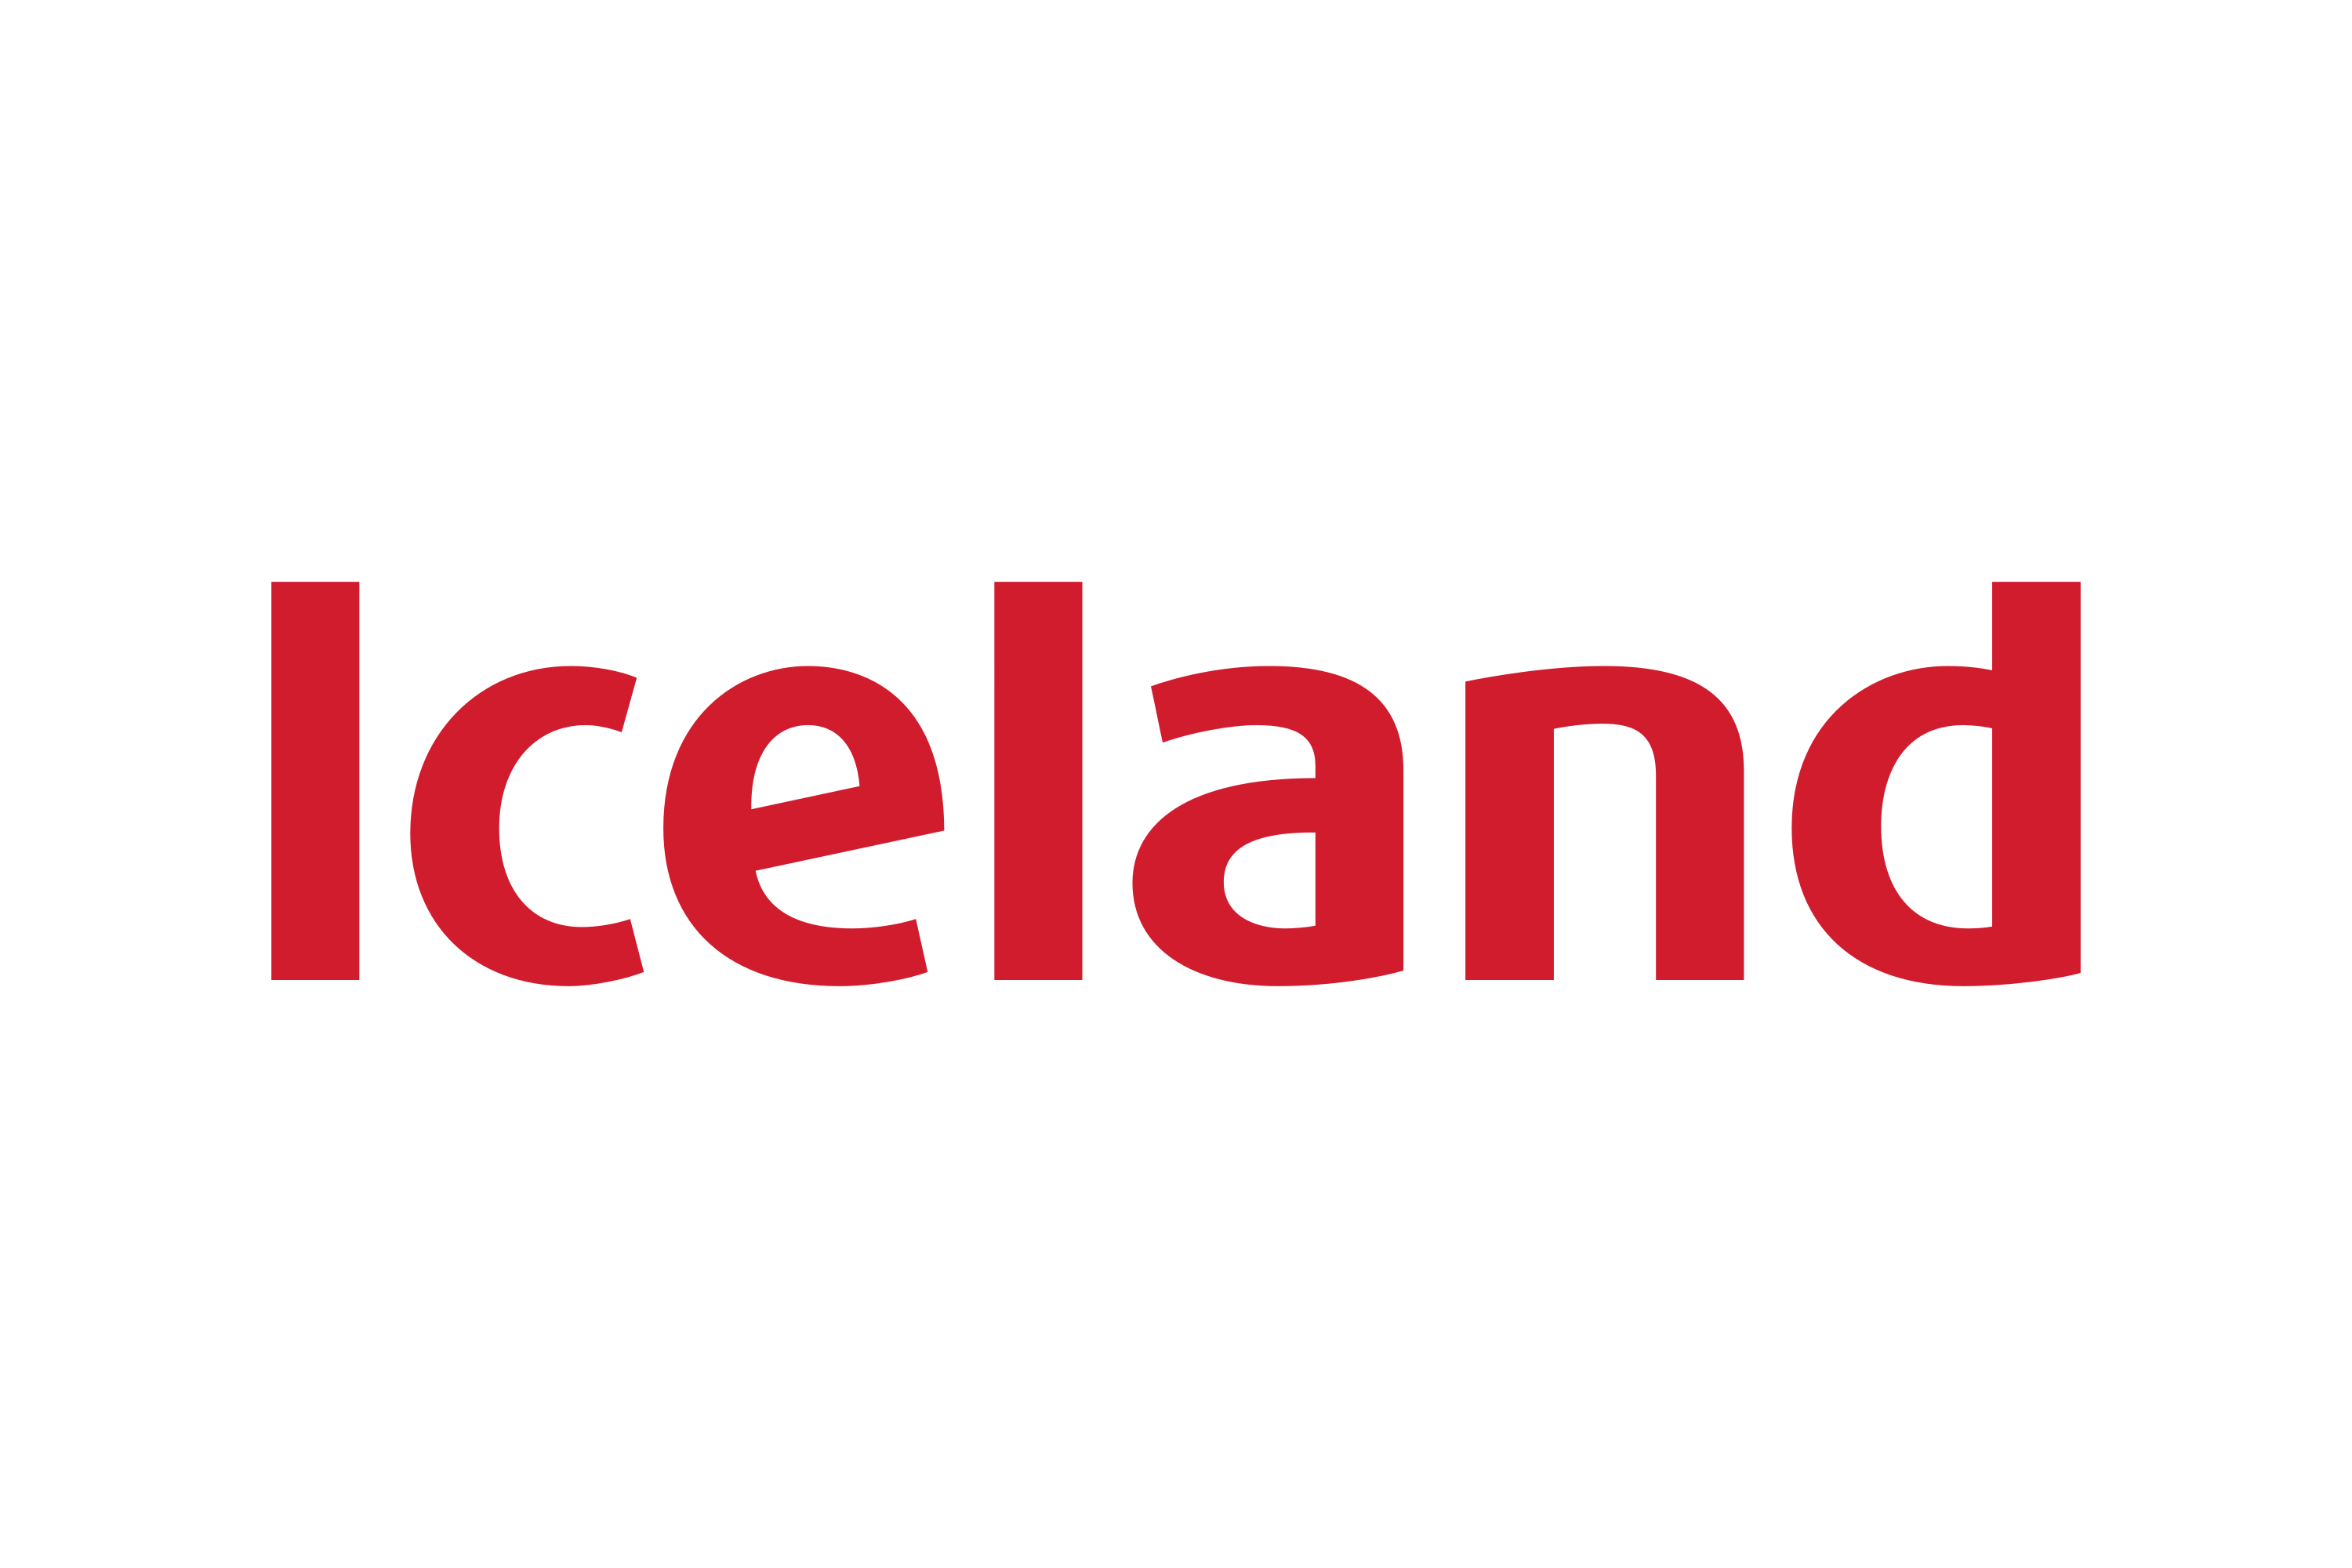 Iceland Discount Code